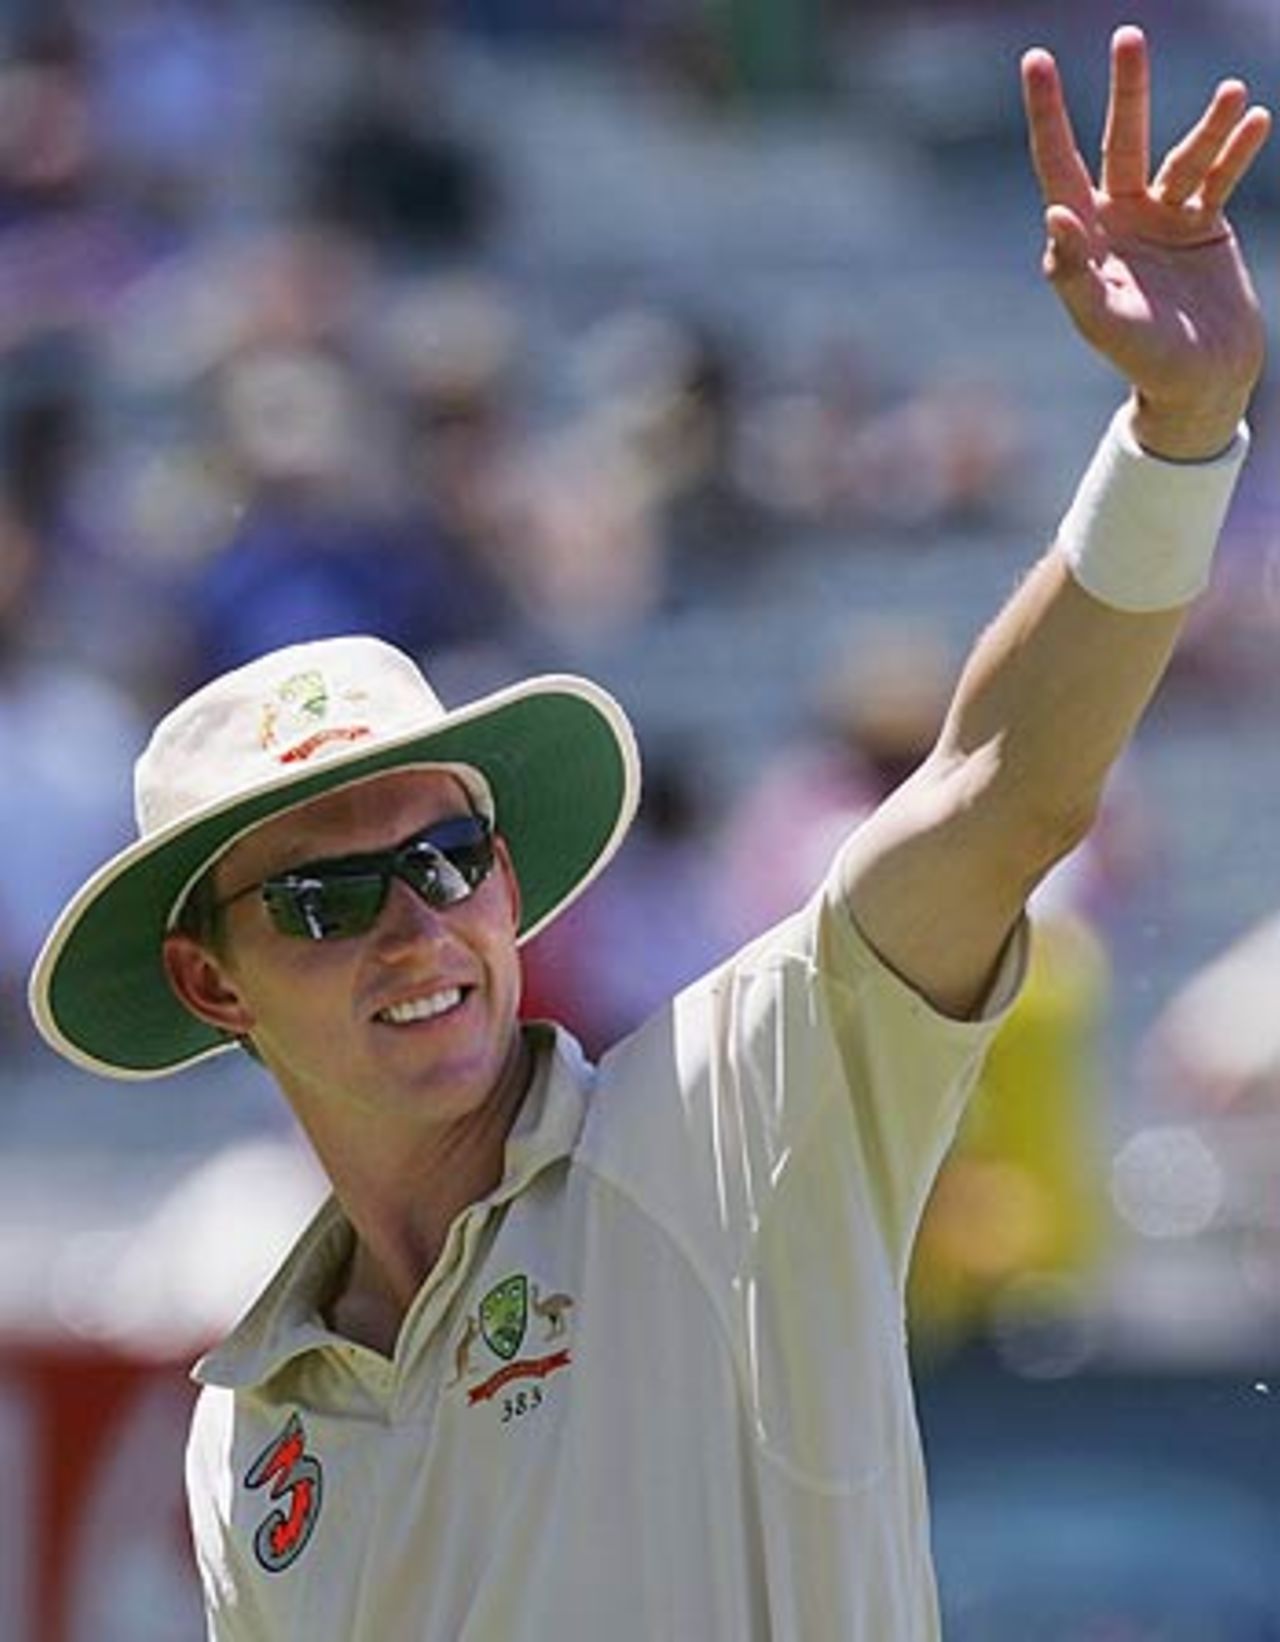 Brett Lee waves to the crowd, Australia v South Africa, 2nd Test, Melbourne, 4th day, December 30, 2005